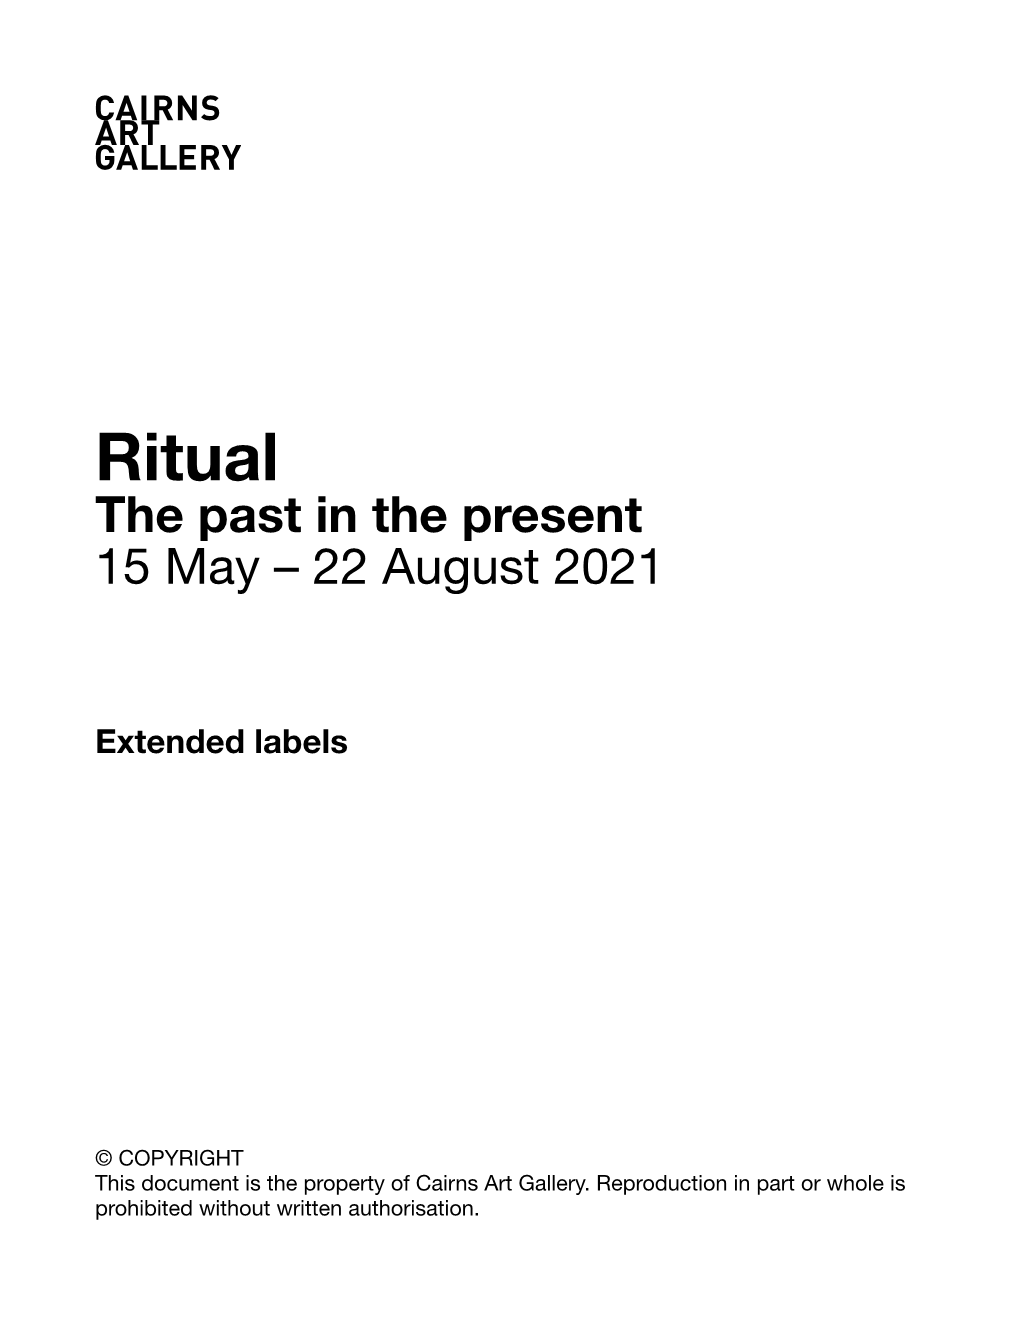 Ritual the Past in the Present 15 May – 22 August 2021